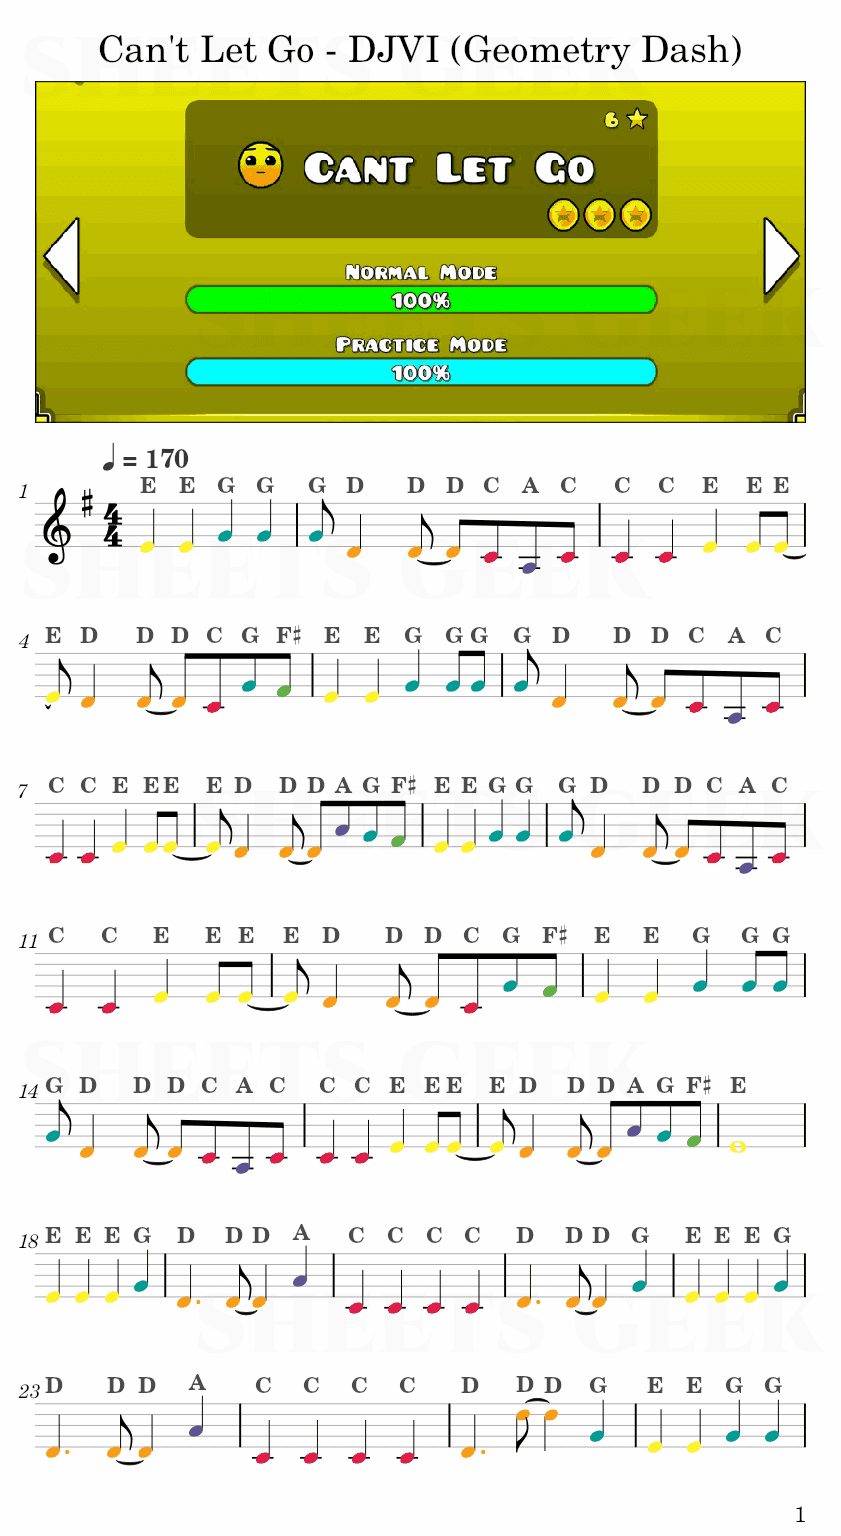 Can't Let Go - DJVI (Geometry Dash) Easy Sheet Music Free for piano, keyboard, flute, violin, sax, cello page 1